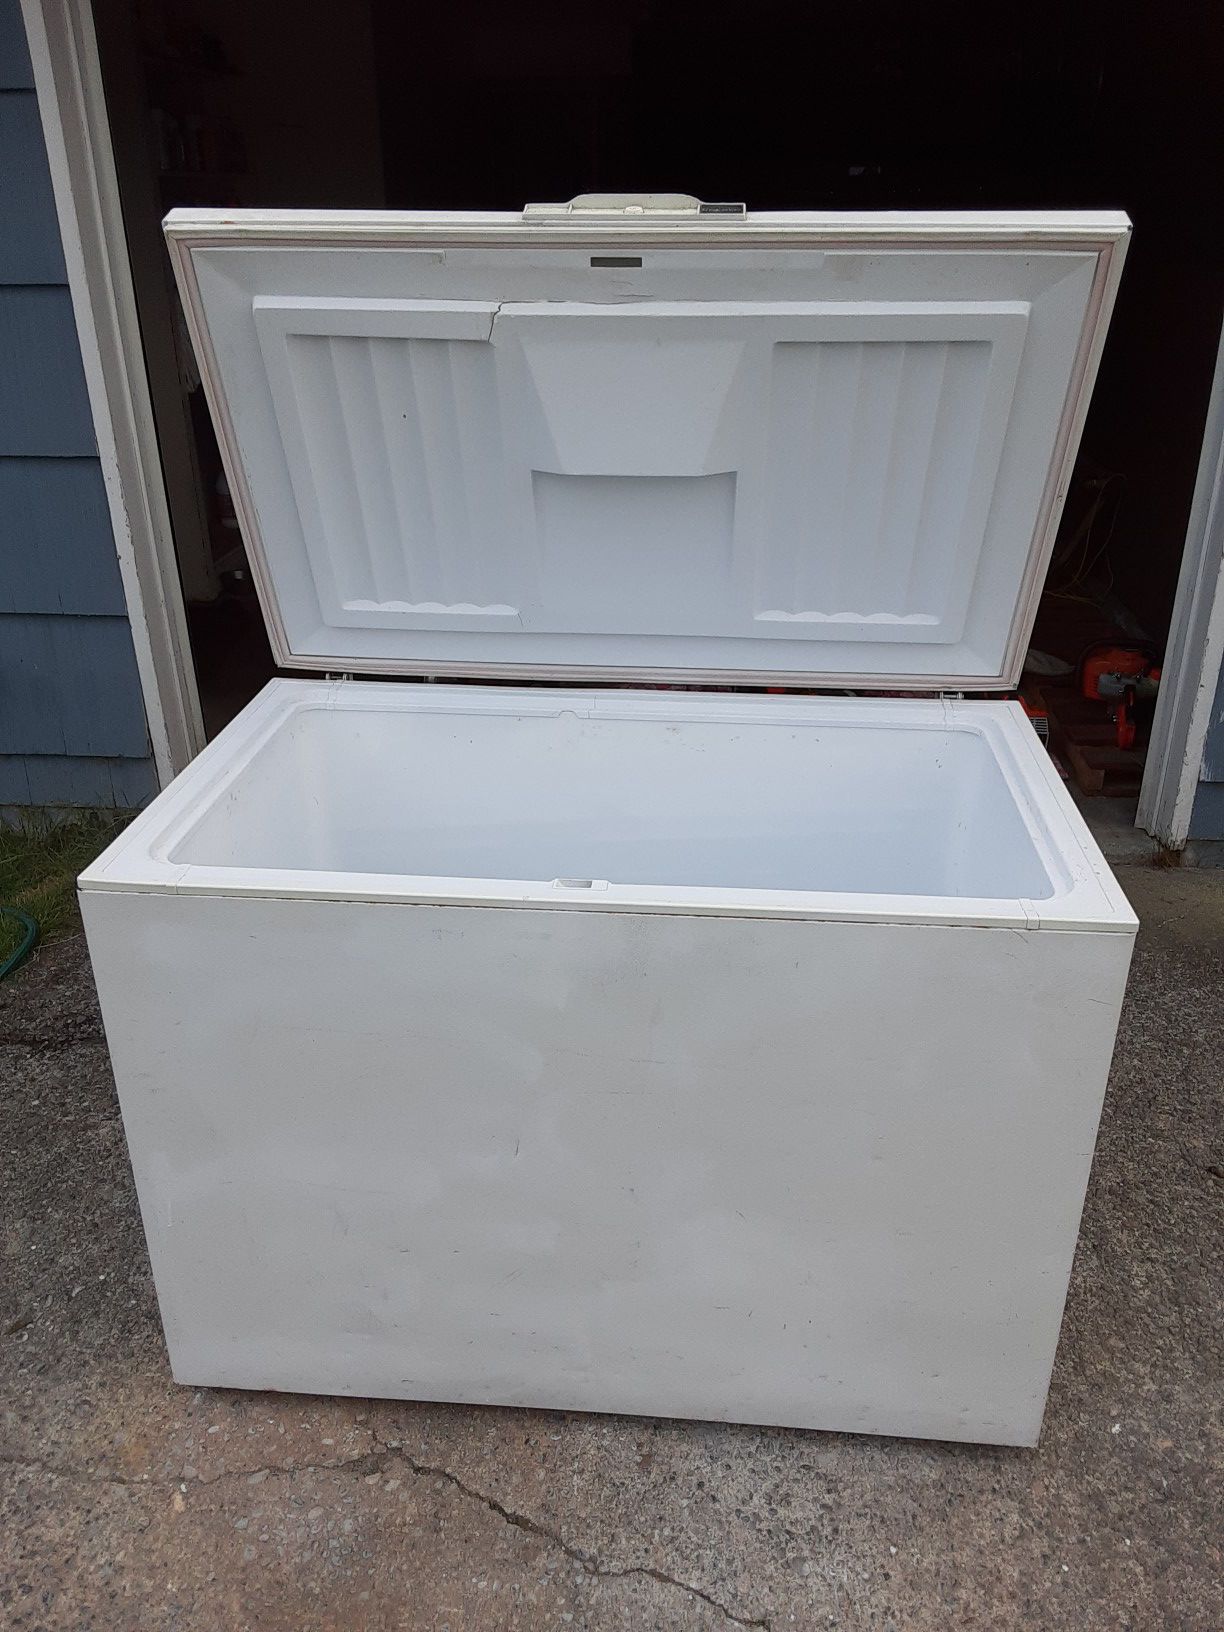 Chest Freezer 15 cubic feet delivery is available firm on my price